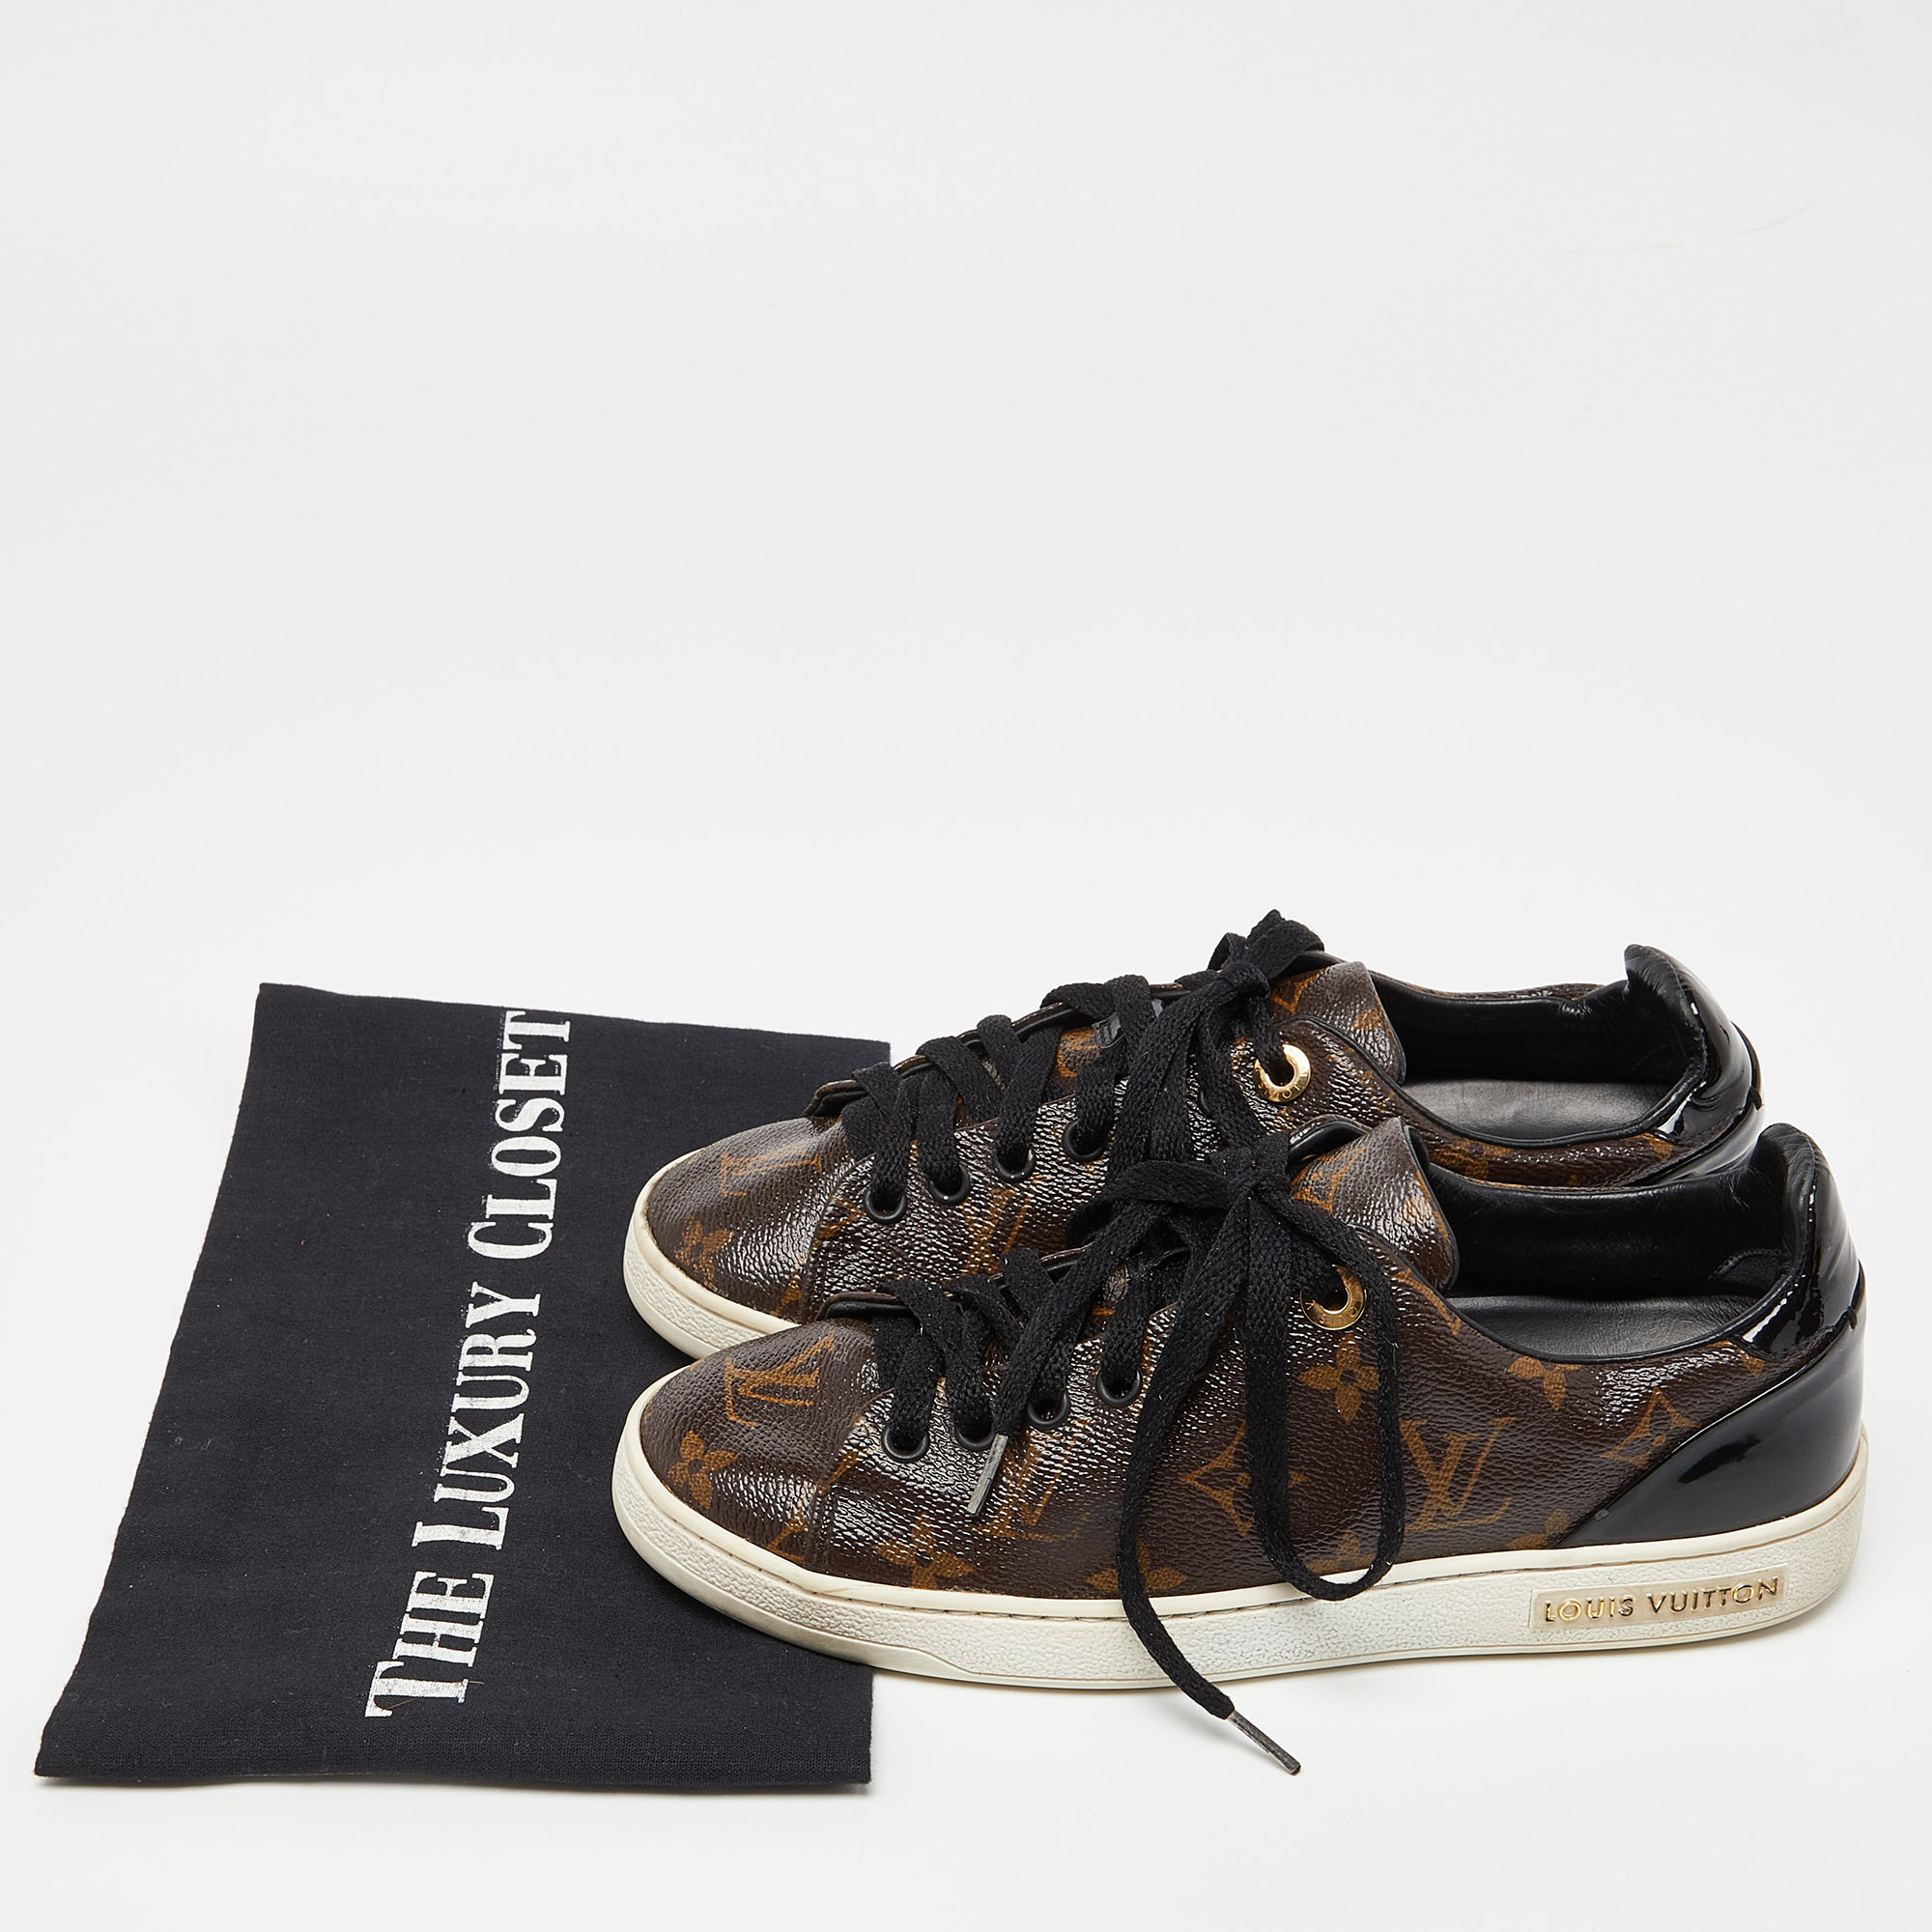 Louis Vuitton Brown/Black Monogram Canvas And Patent Leather Frontrow Sneakers Size 36